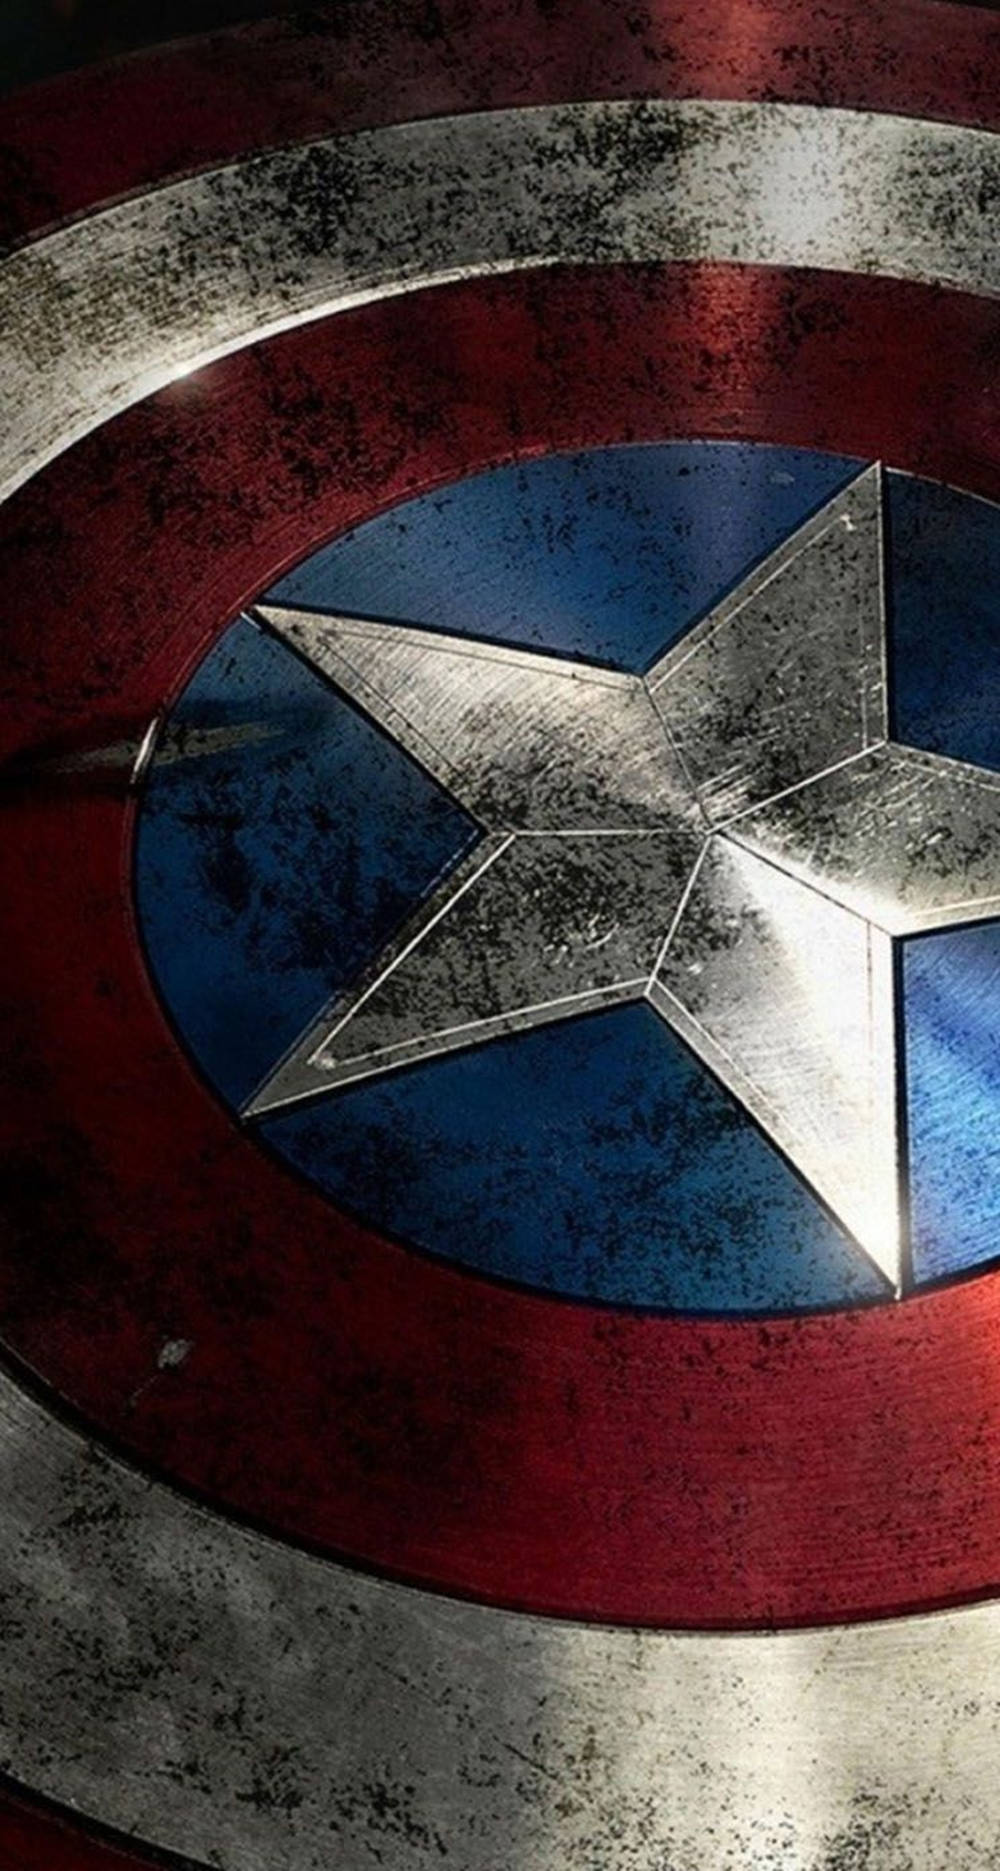 Captain America Shield iPhone Tilted View Wallpaper